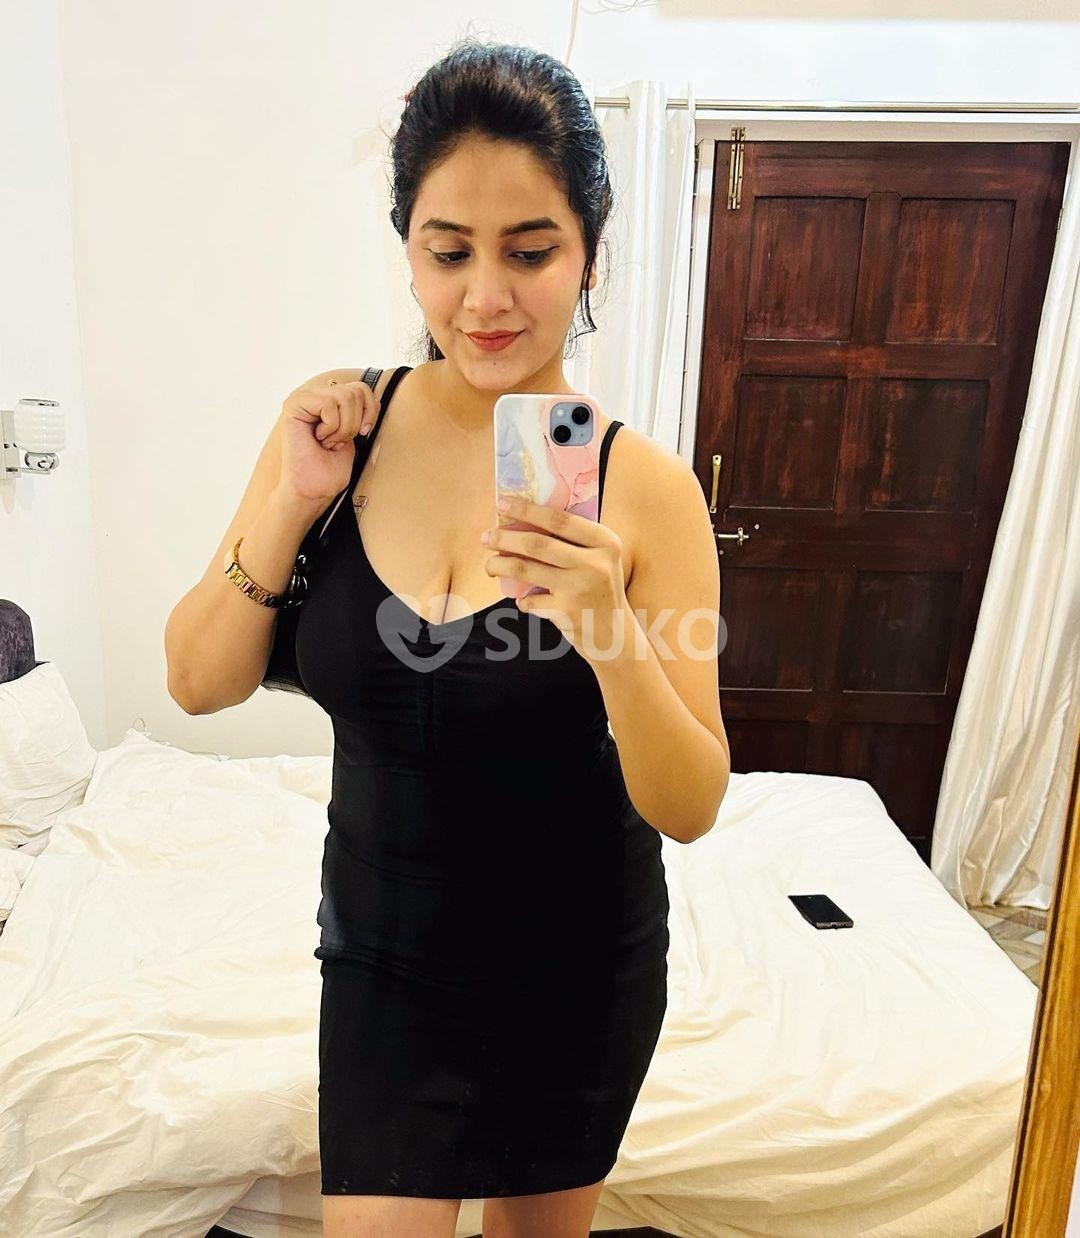 PONDY BAZAAR 💥 24×7 DOORSTEP INCALL ❤ OUTCALL SERVICE AVAILABLE CALL ME NOW LOW RATE PRIVATE DECENT LOCAL COLLAGE 